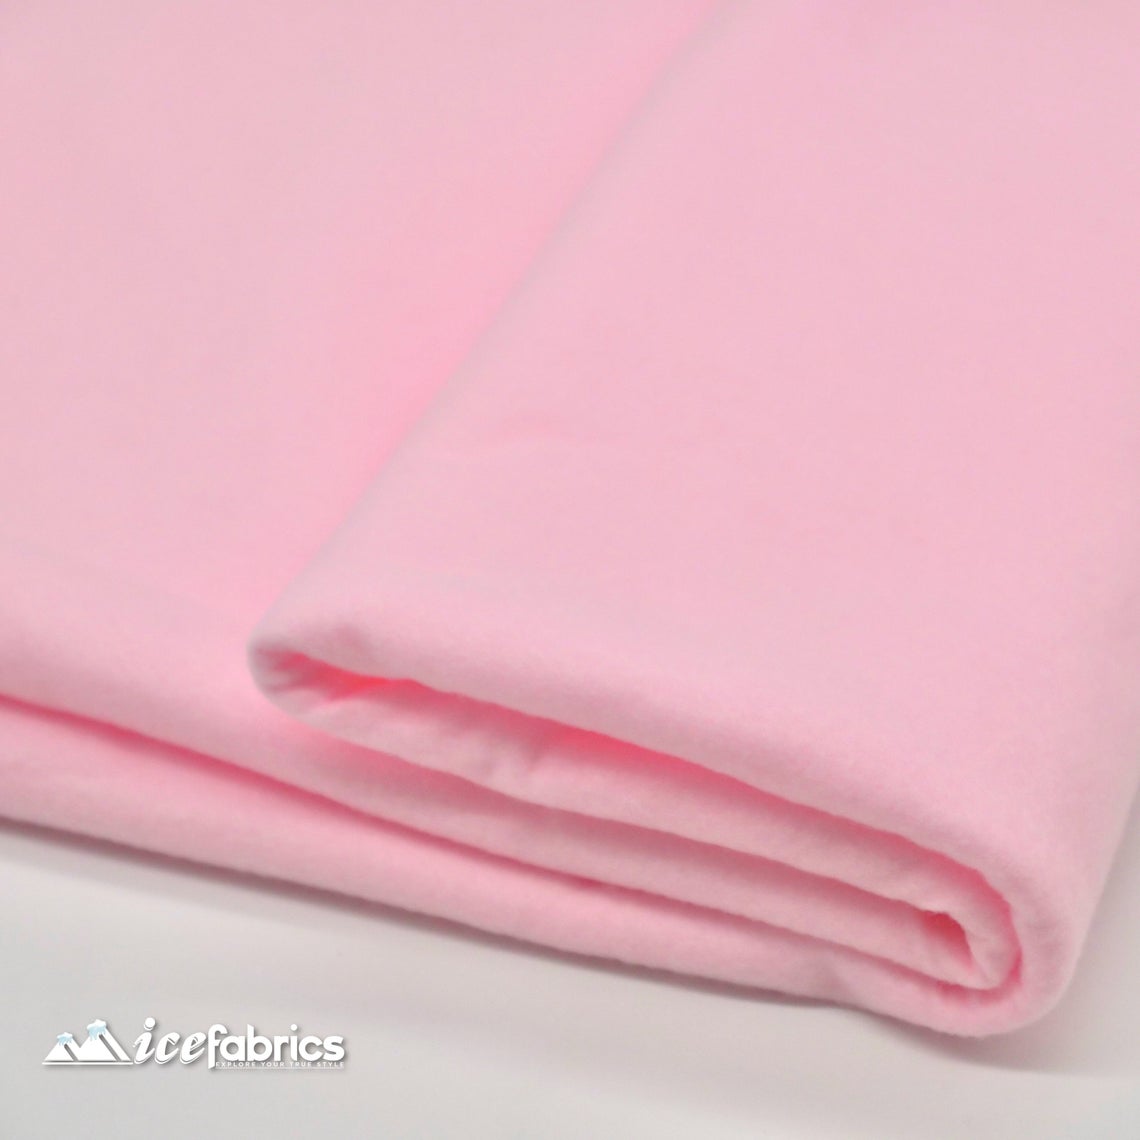 72" Wide 1.6 mm Thick Acrylic Pink Felt Fabric By The YardICE FABRICSICE FABRICSPer Yard1.6mm Thick72" Wide 1.6 mm Thick Acrylic Pink Felt Fabric By The Yard ICE FABRICS